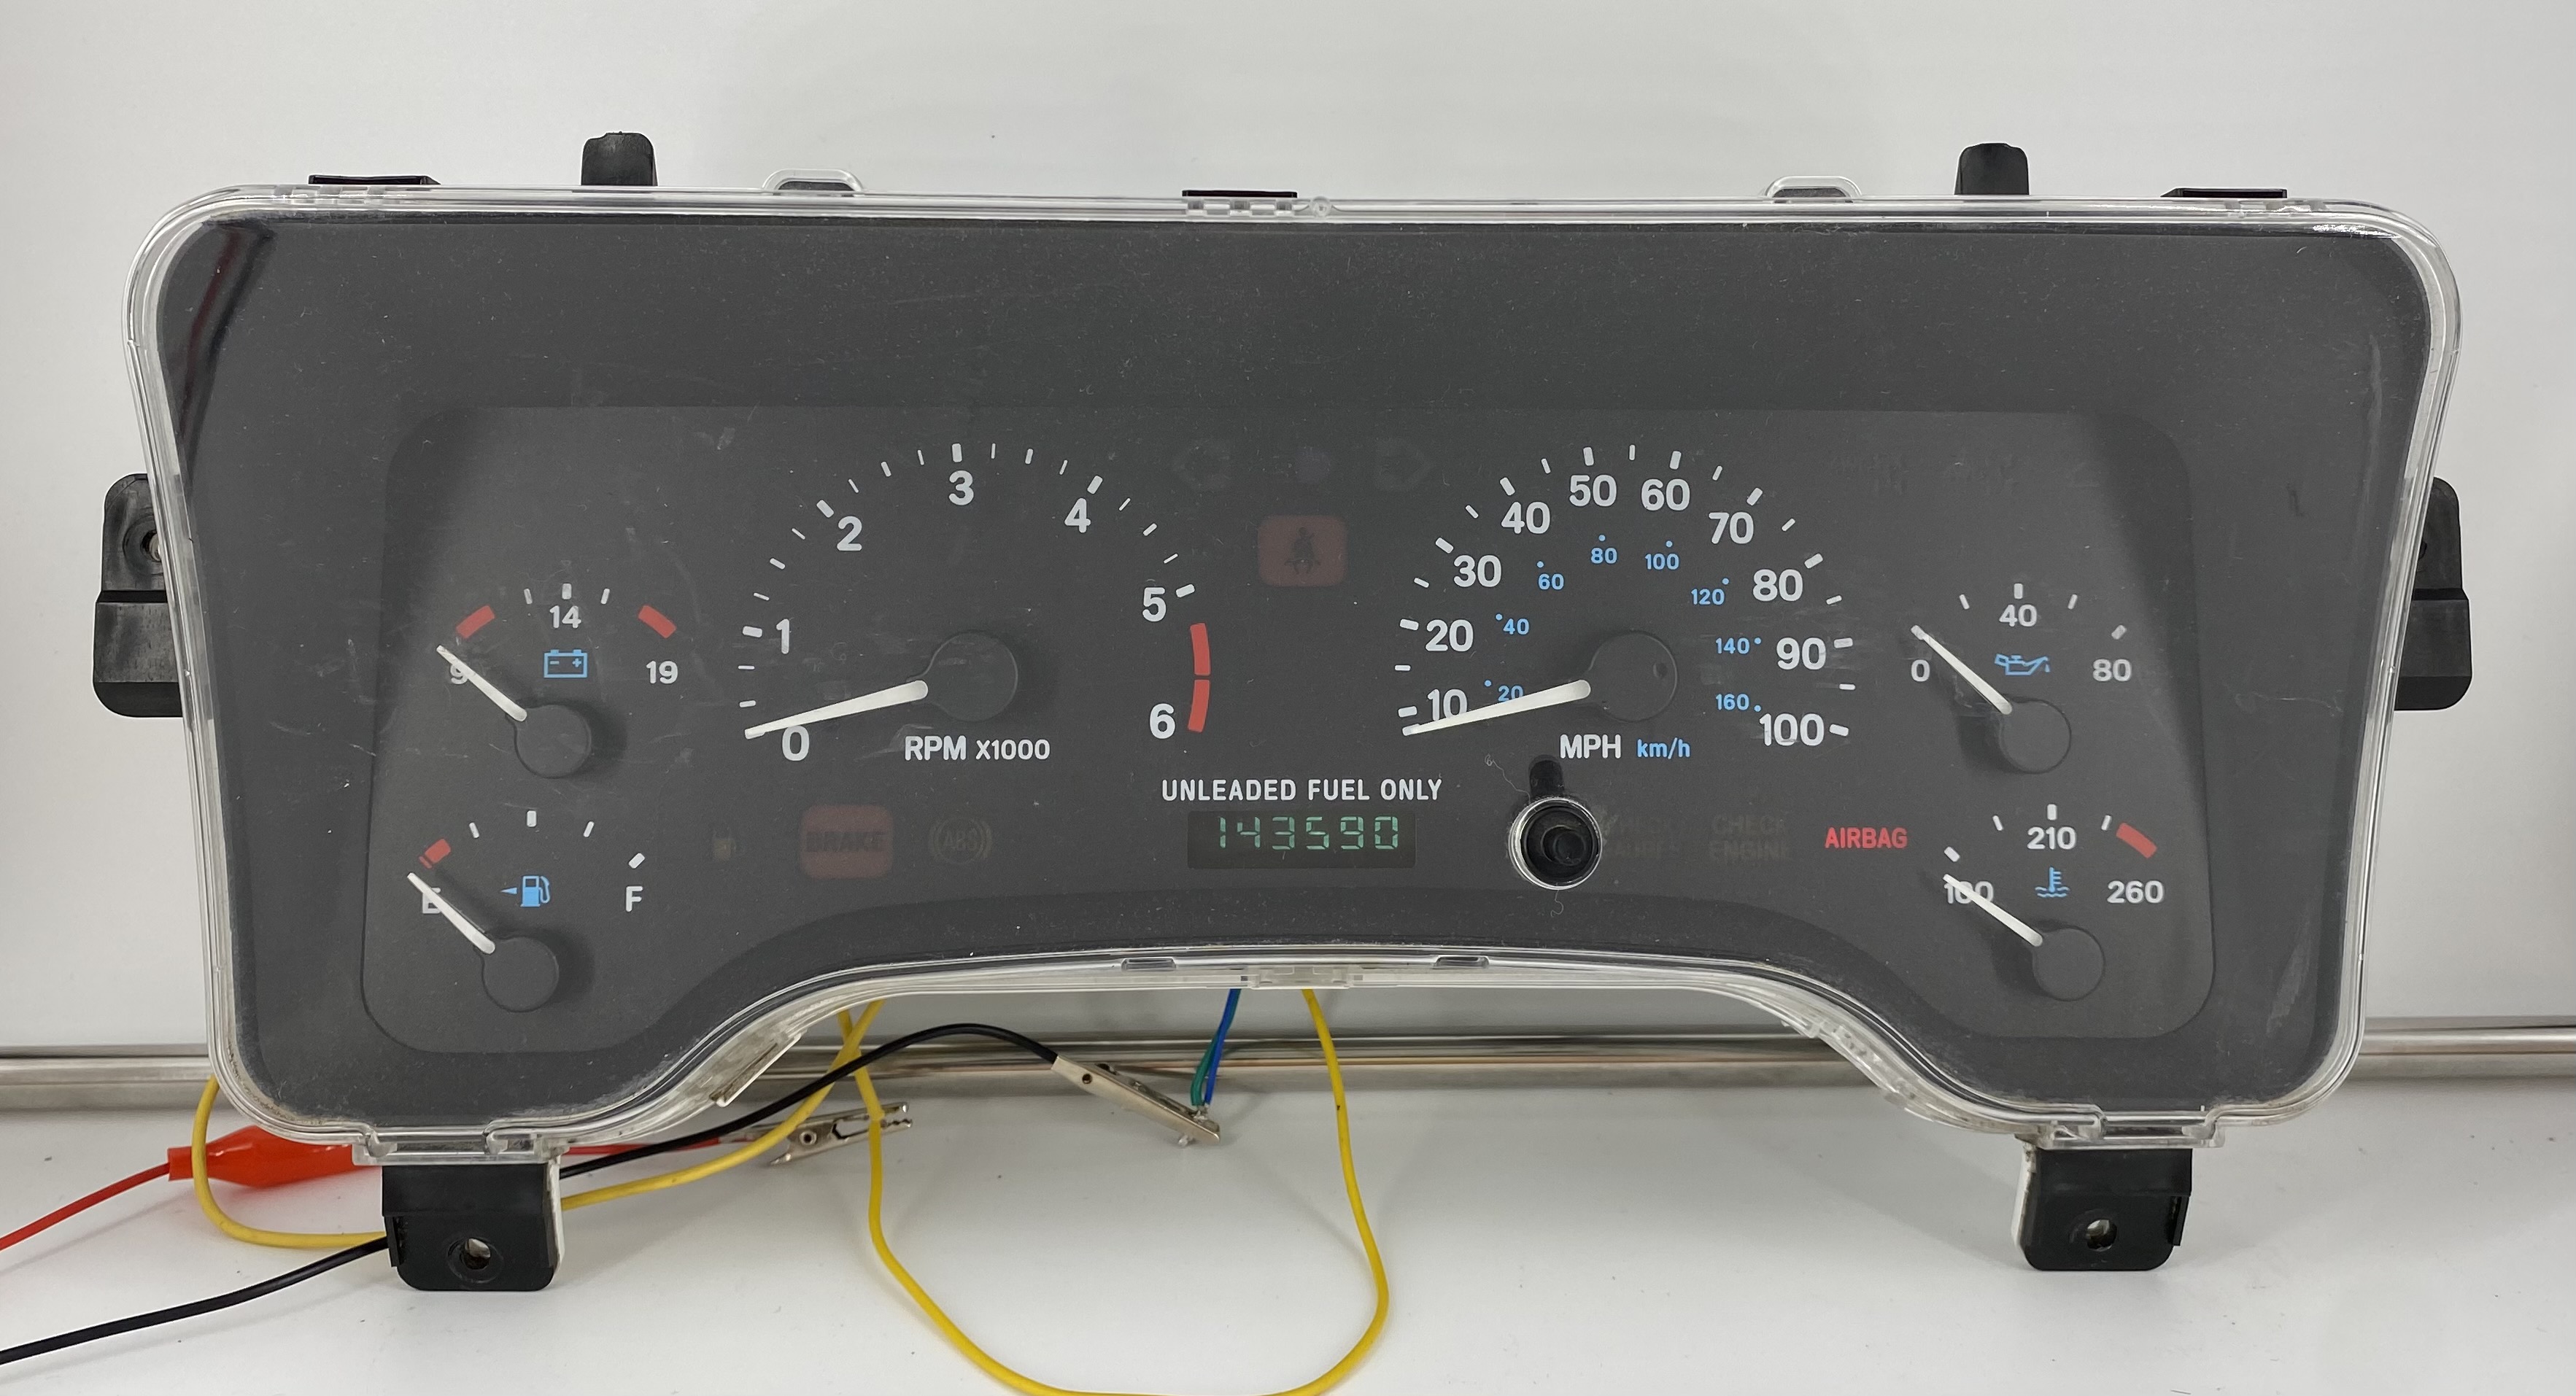 1997 JEEP WRANGLER USED DASHBOARD INSTRUMENT CLUSTER FOR SALE (MPH) - DASHBOARD  INSTRUMENT CLUSTER